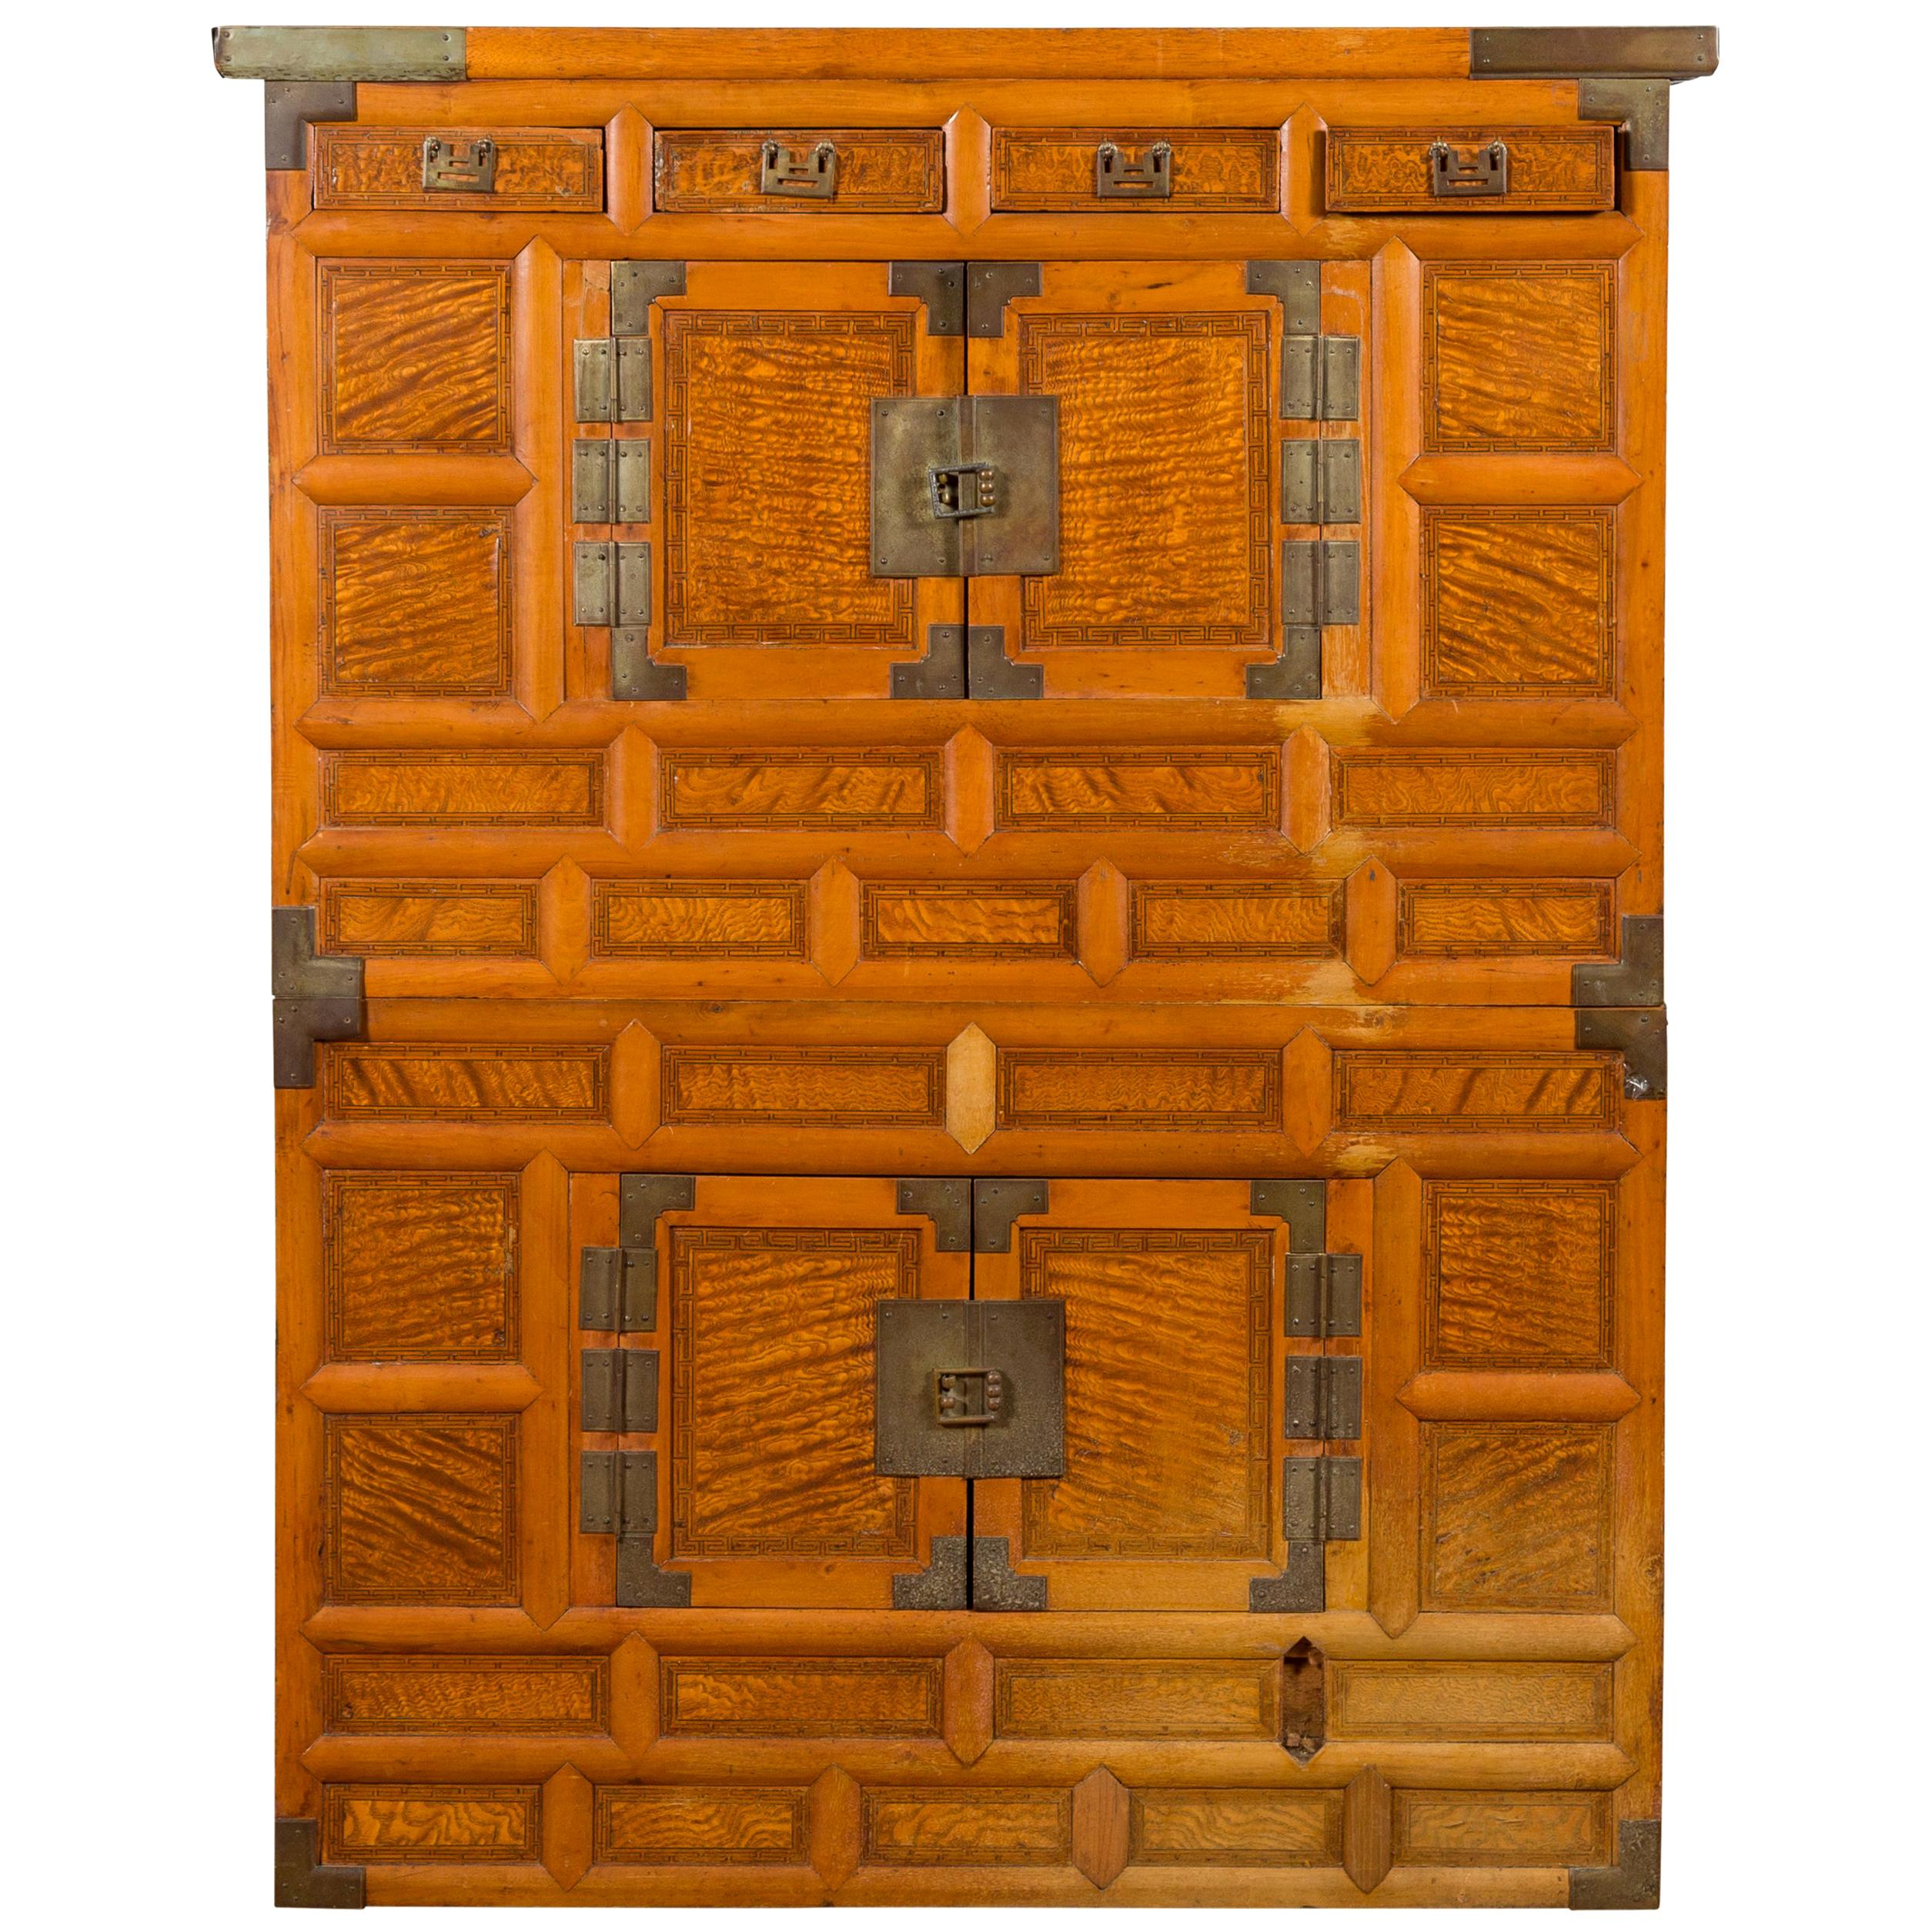 Korean 19th Century Burl Wood and Brass Two-Part Cabinet with Doors and Drawers